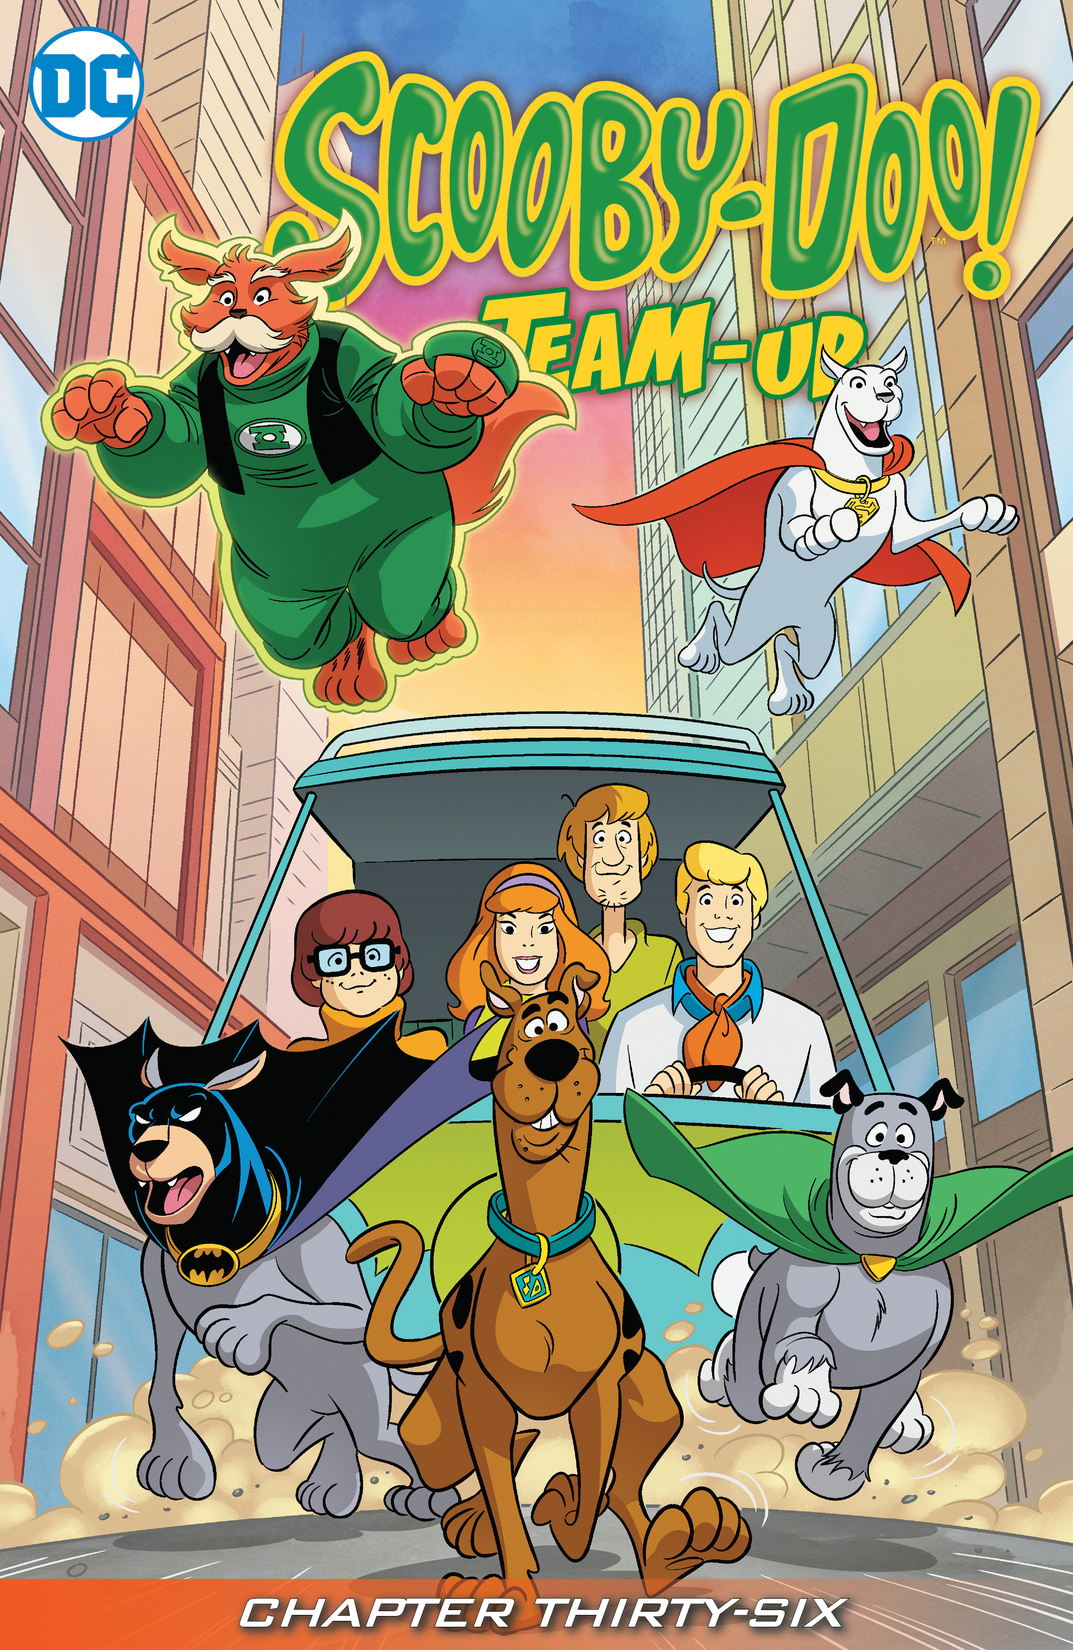 Scooby-Doo Team-Up #36 preview images